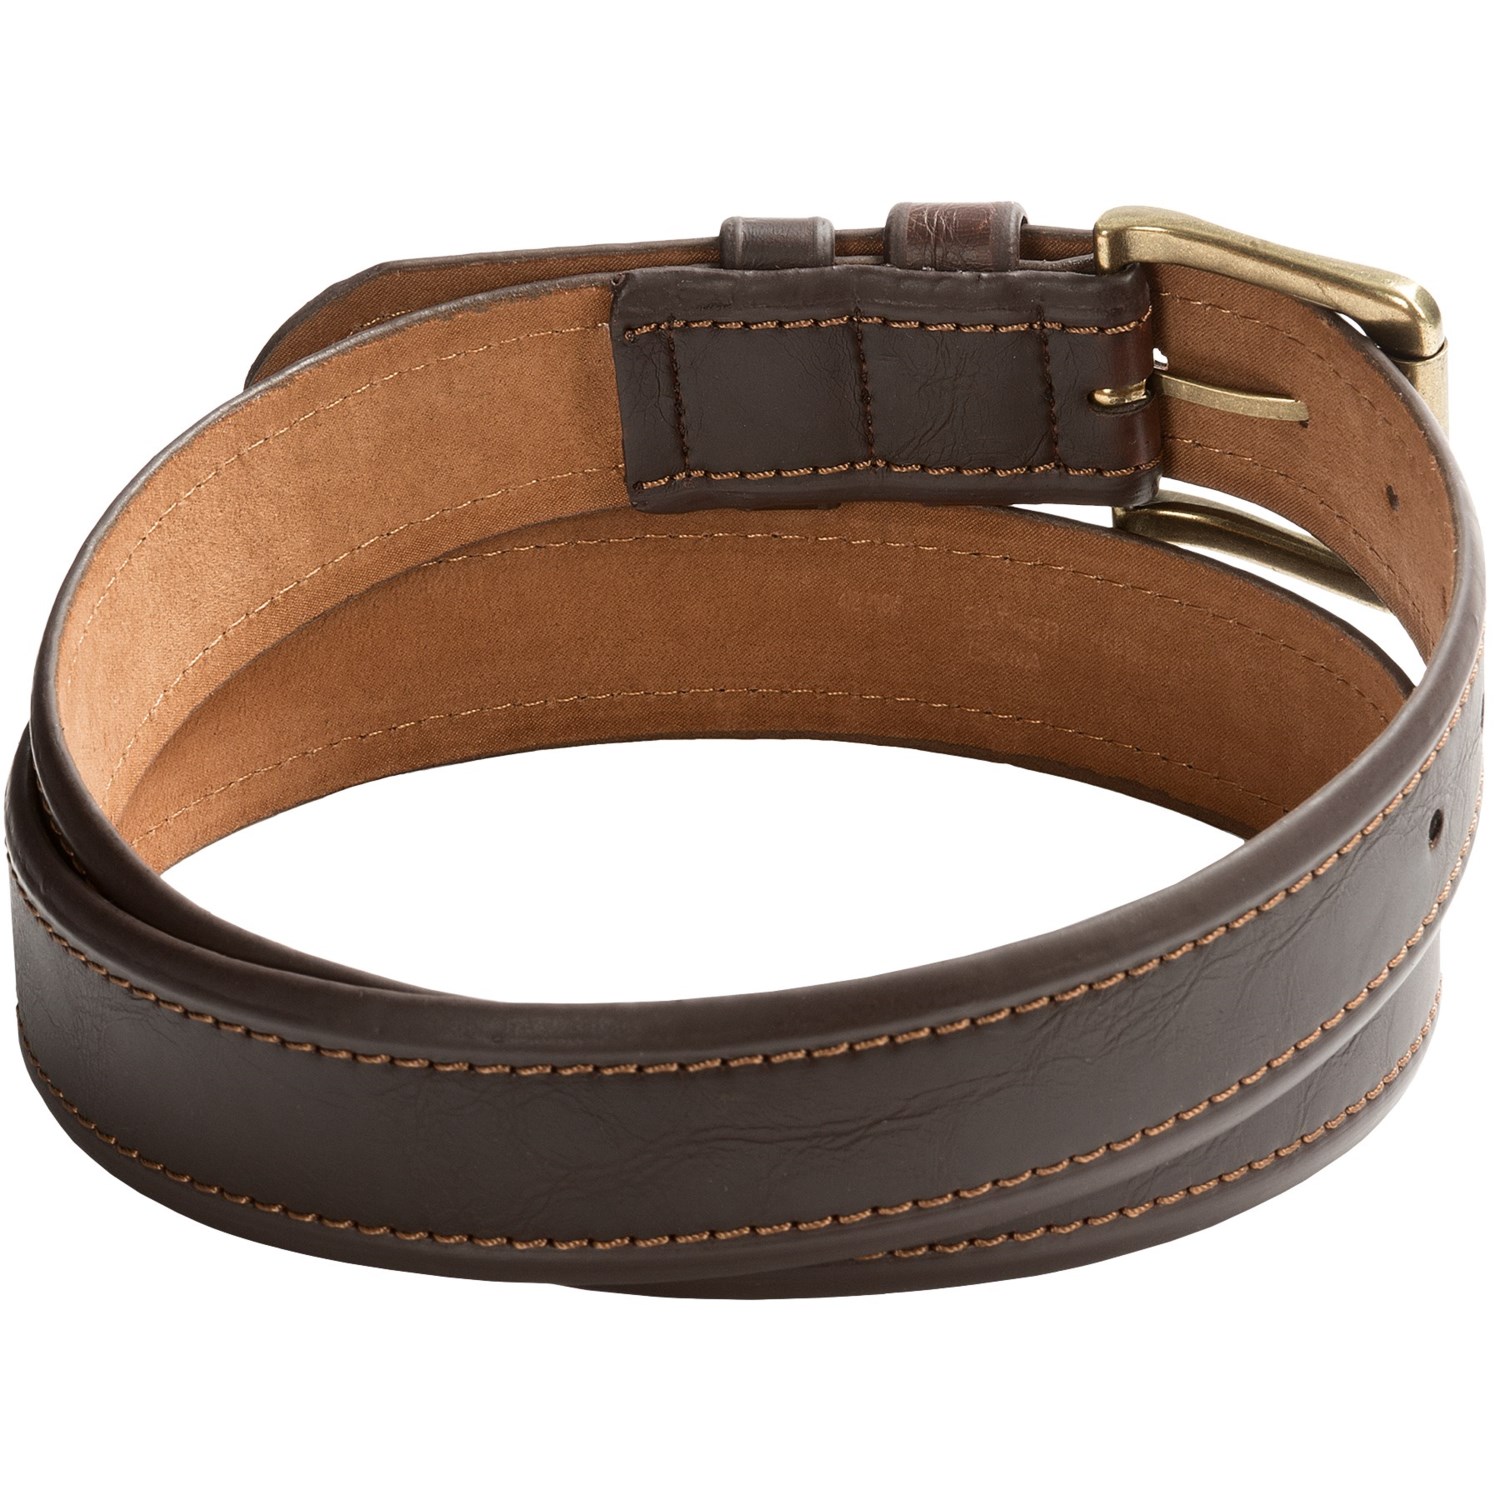 Wolverine Double Trapper Leather Belt (For Men) - Save 40%